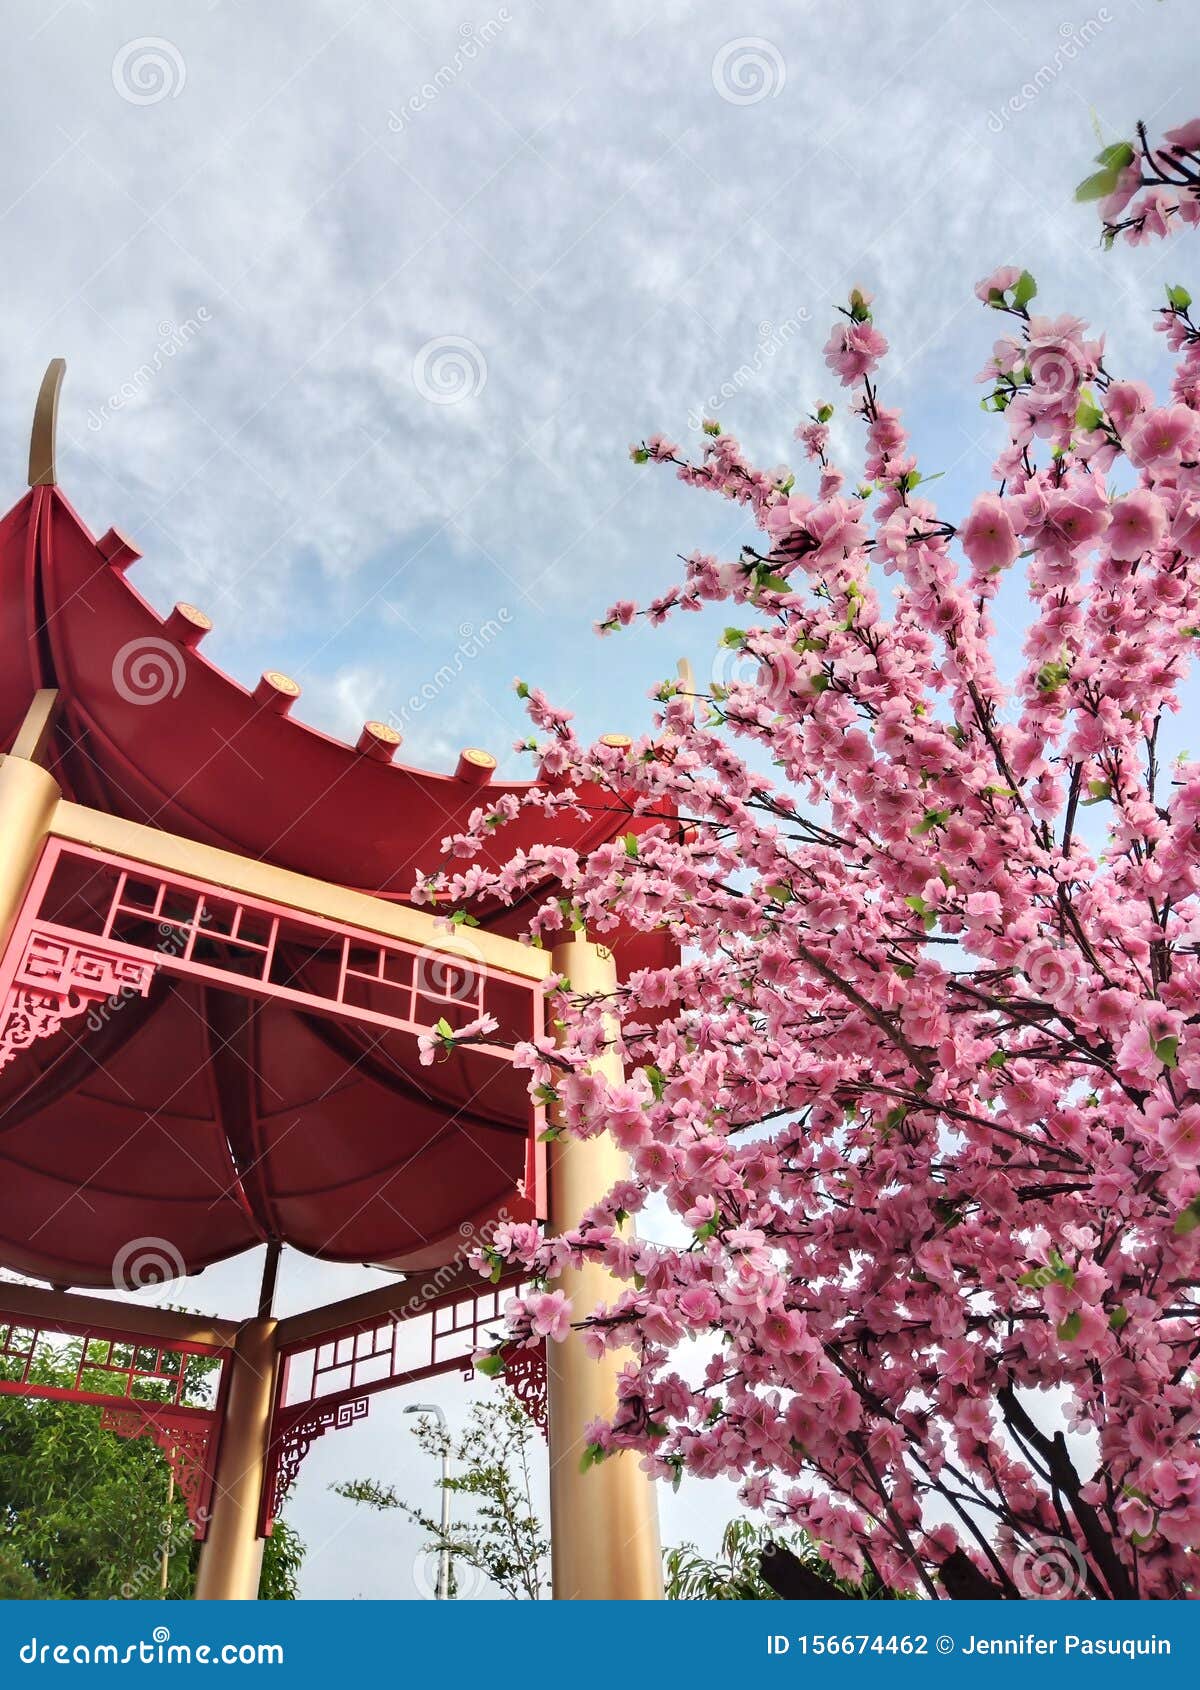 Cherry blossoms philippines 32 Days